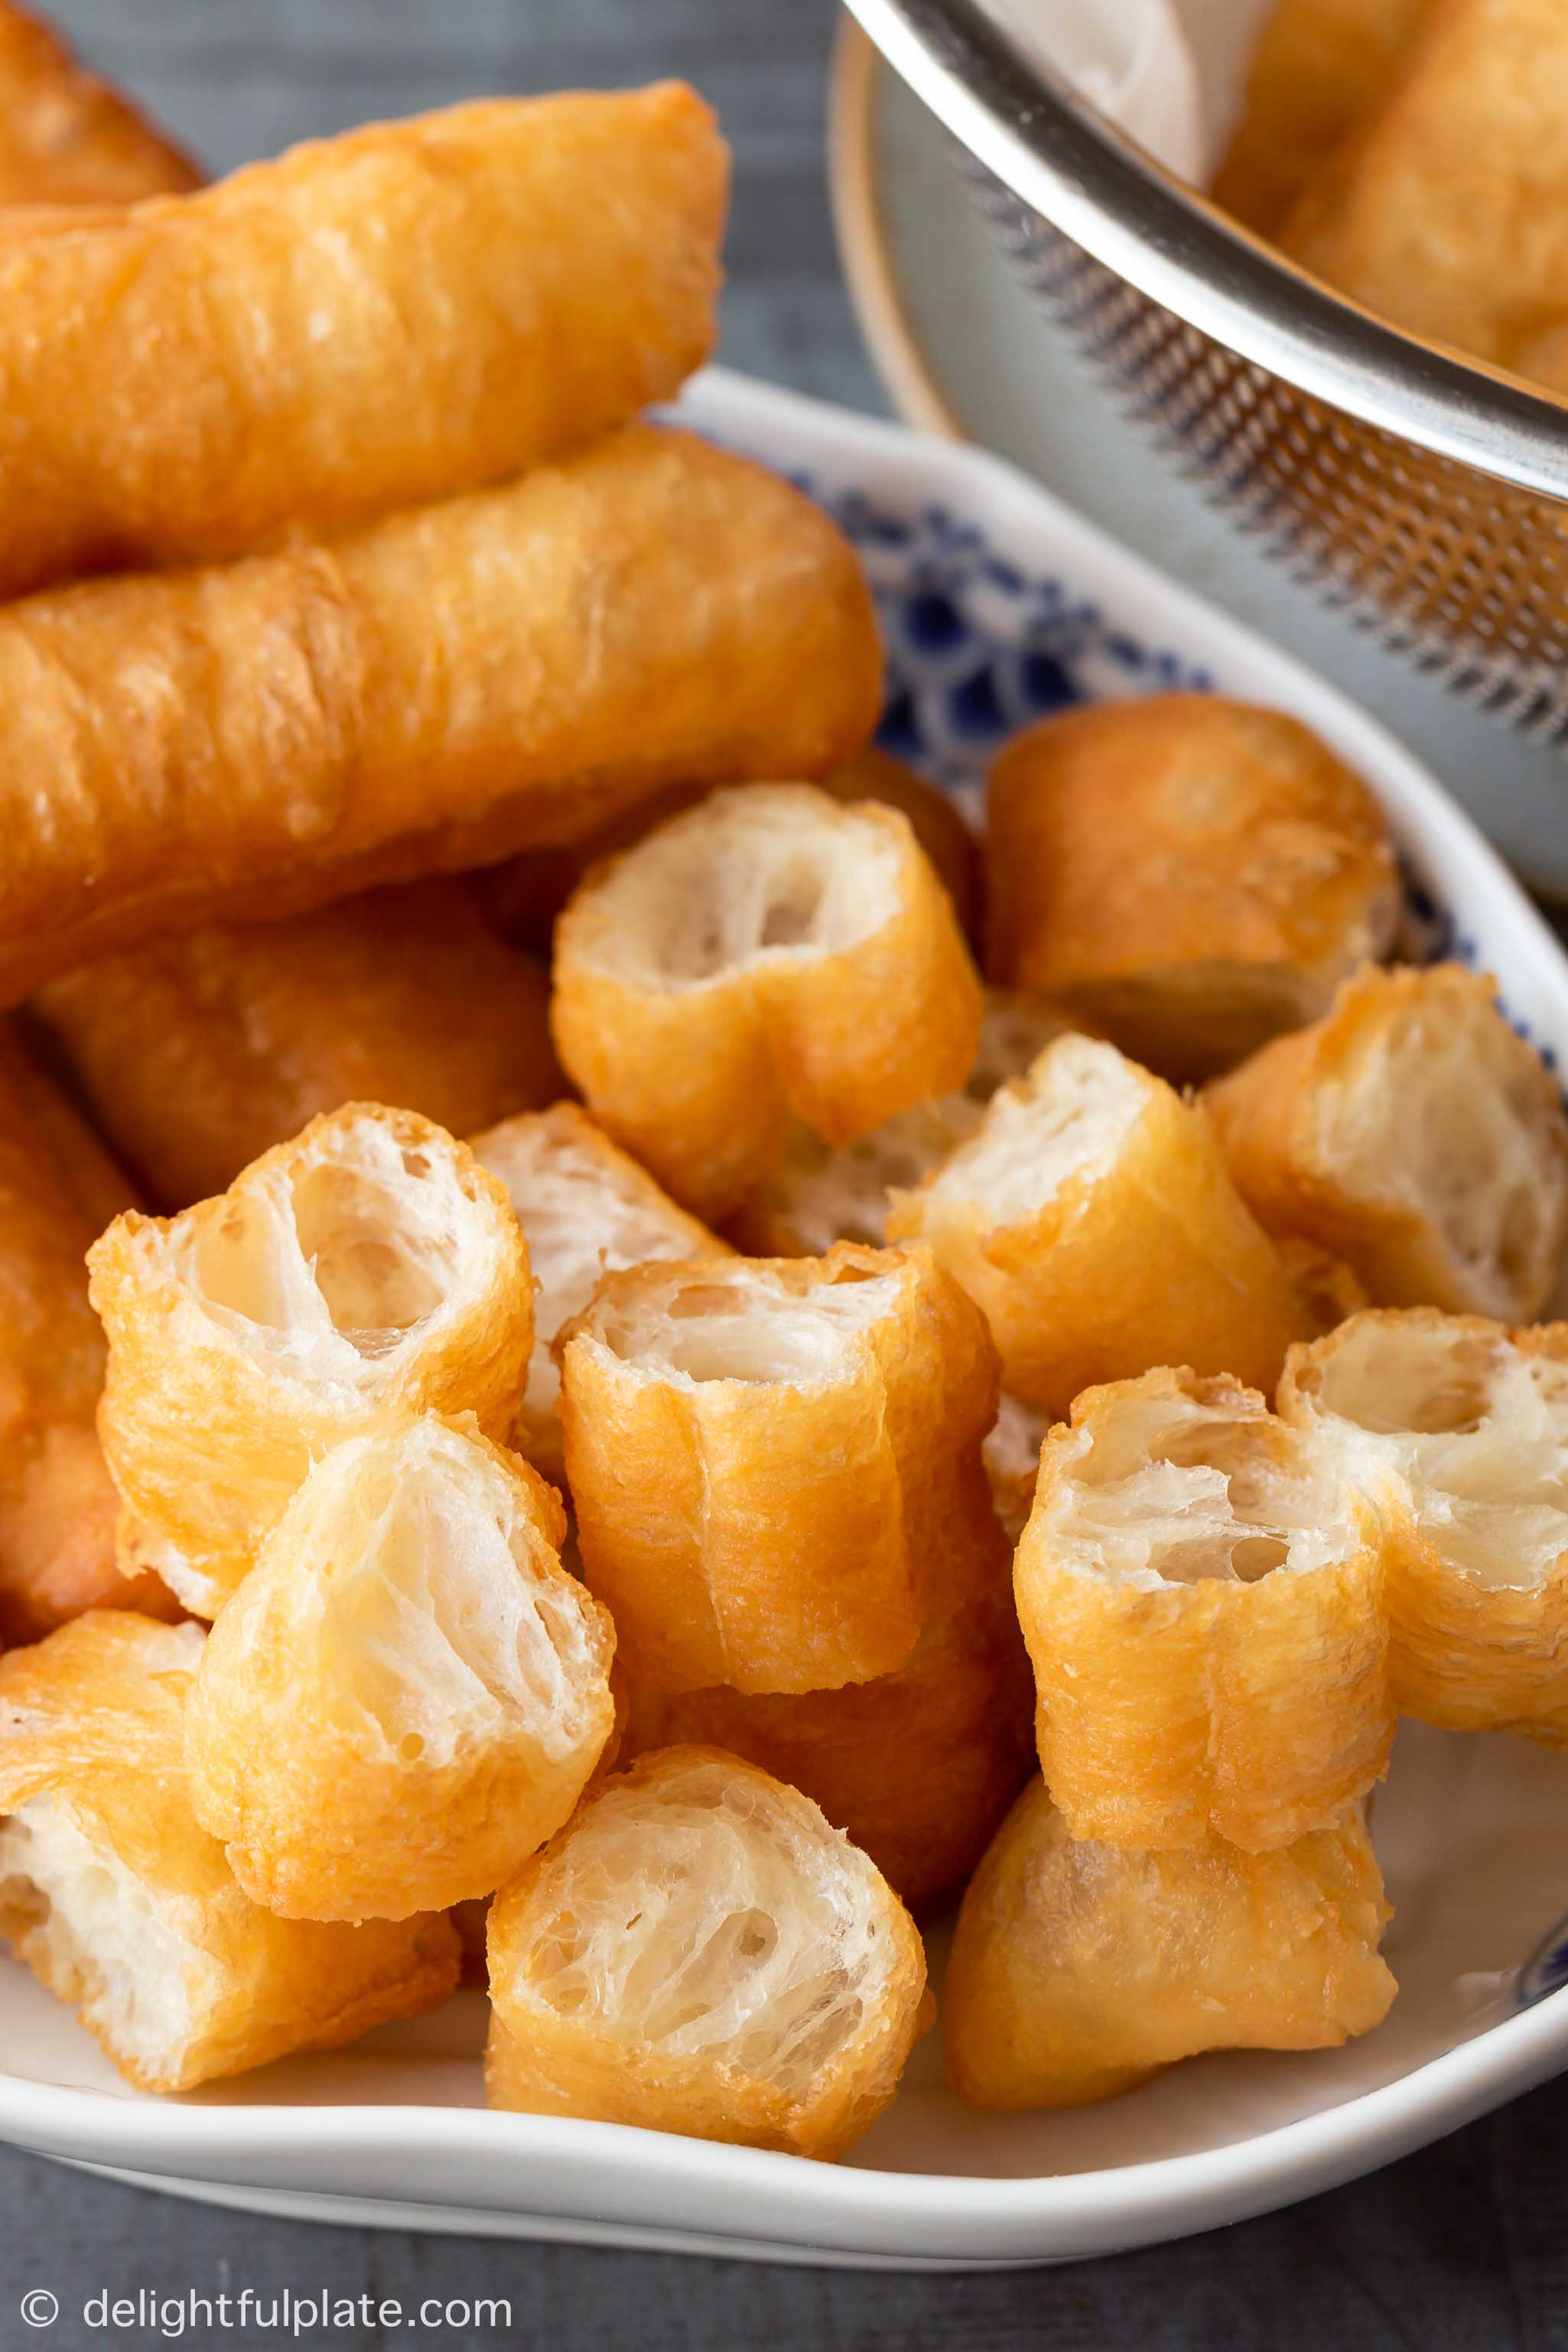 pieces of Chinese fried dough sticks (crullers) on a serving plate.